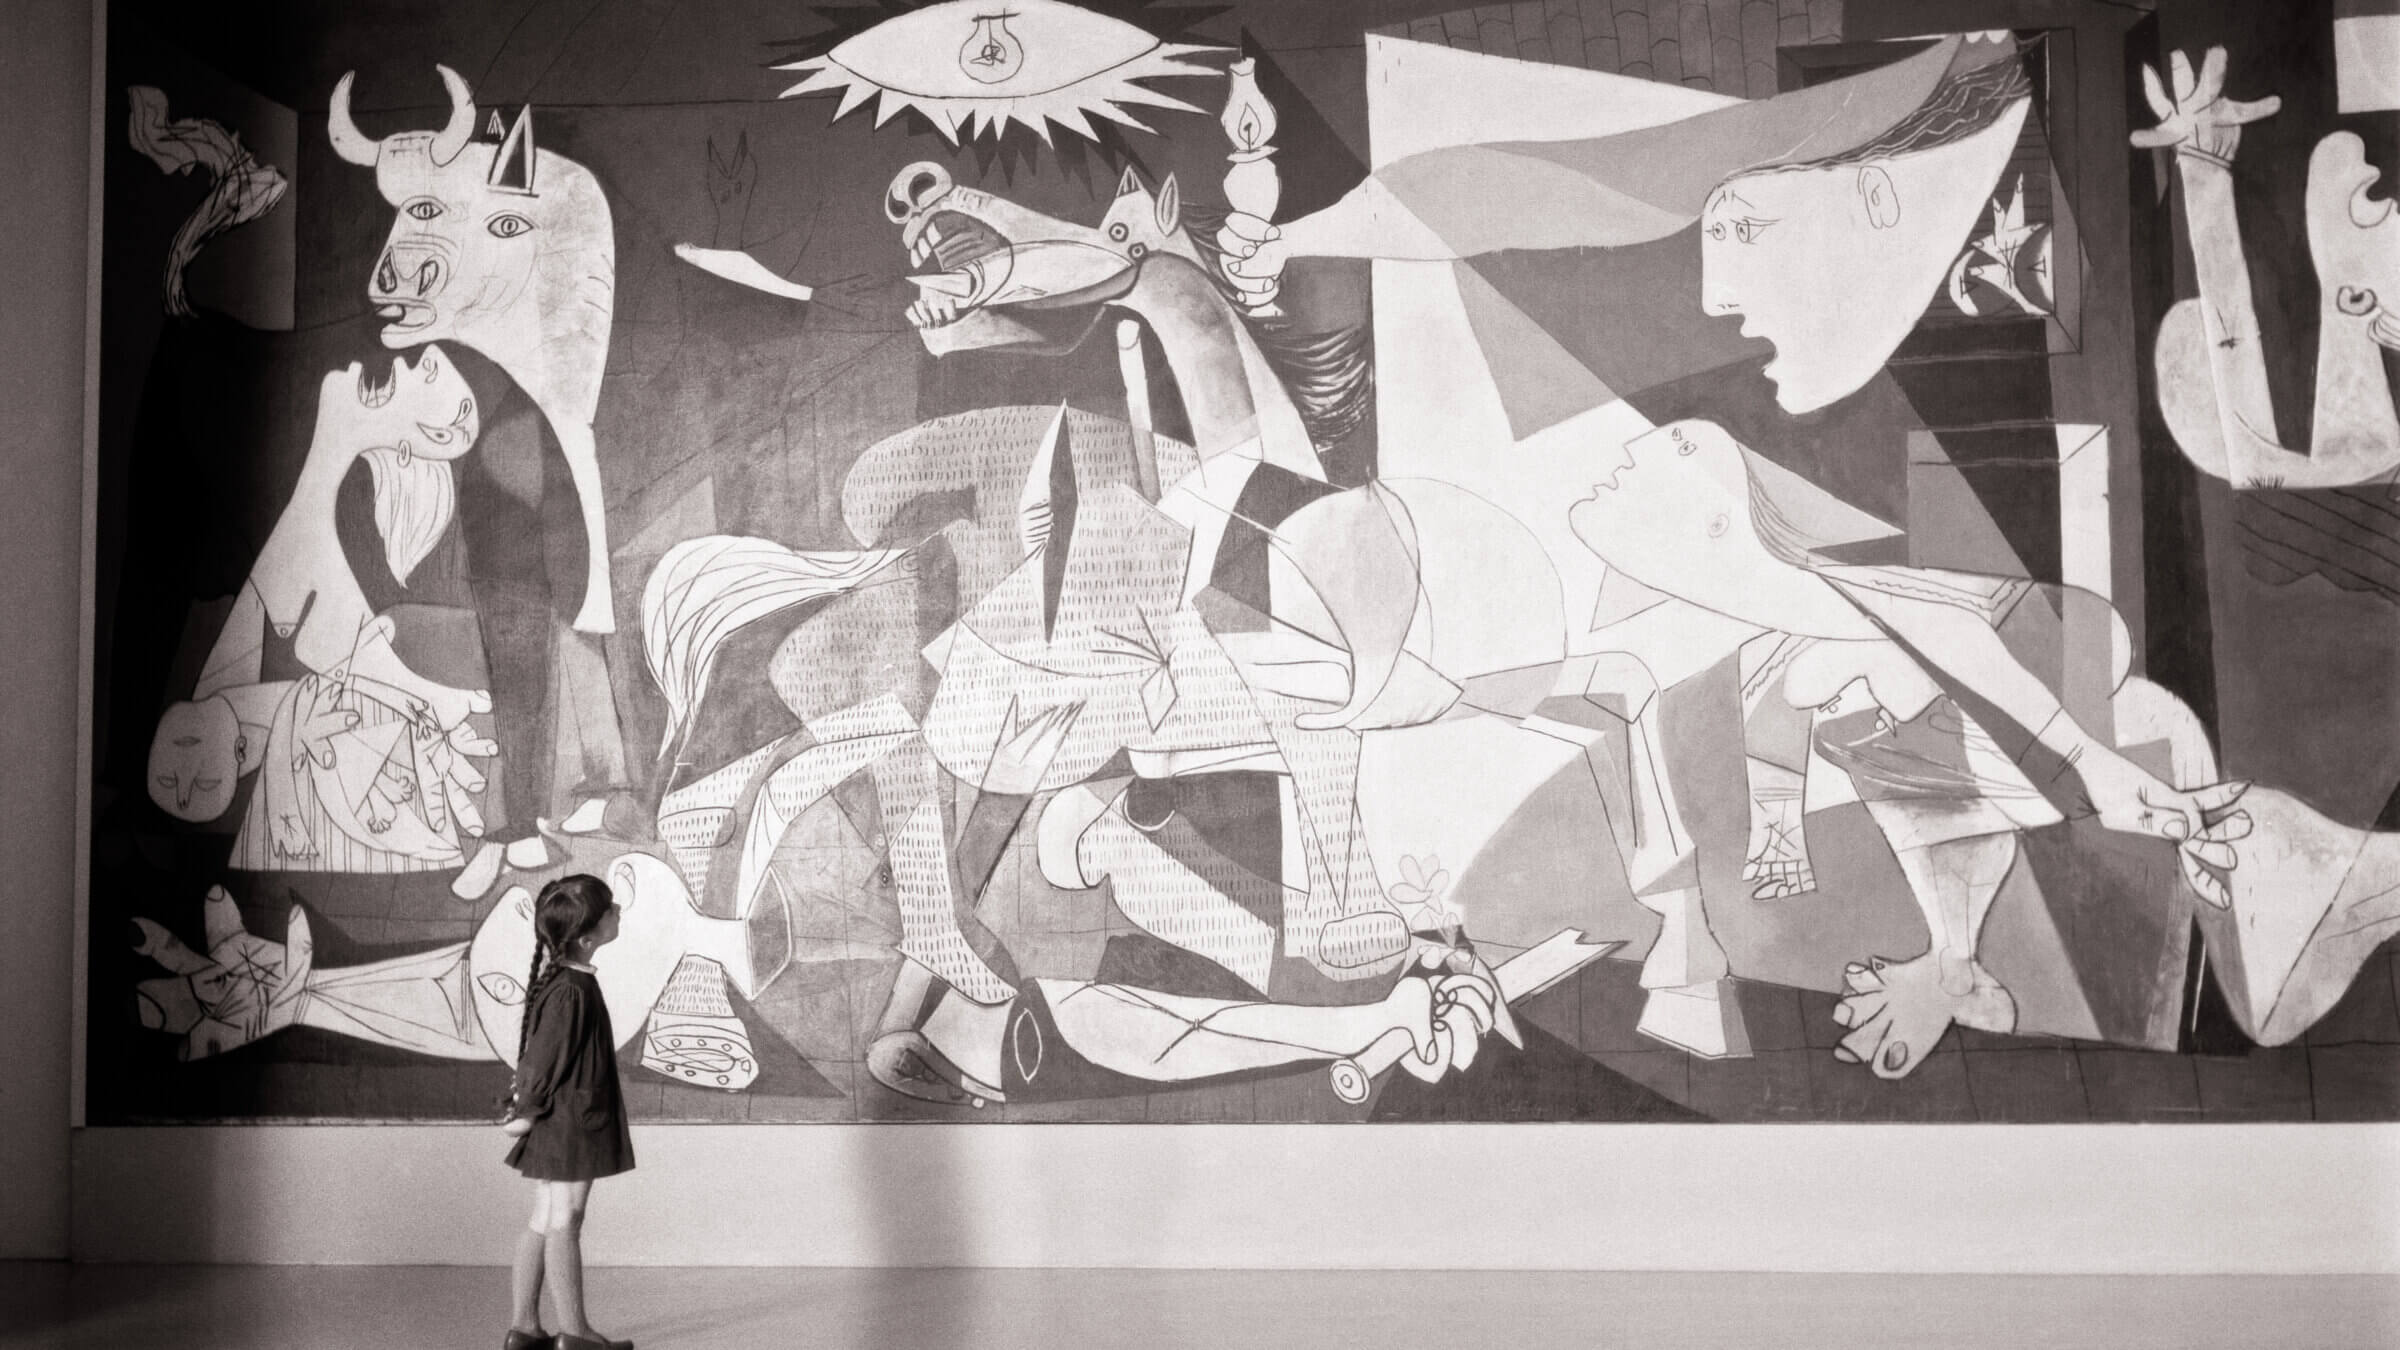 Does this child see the anti-war in Picasso's <i>Guernica</i> or something else entirely?